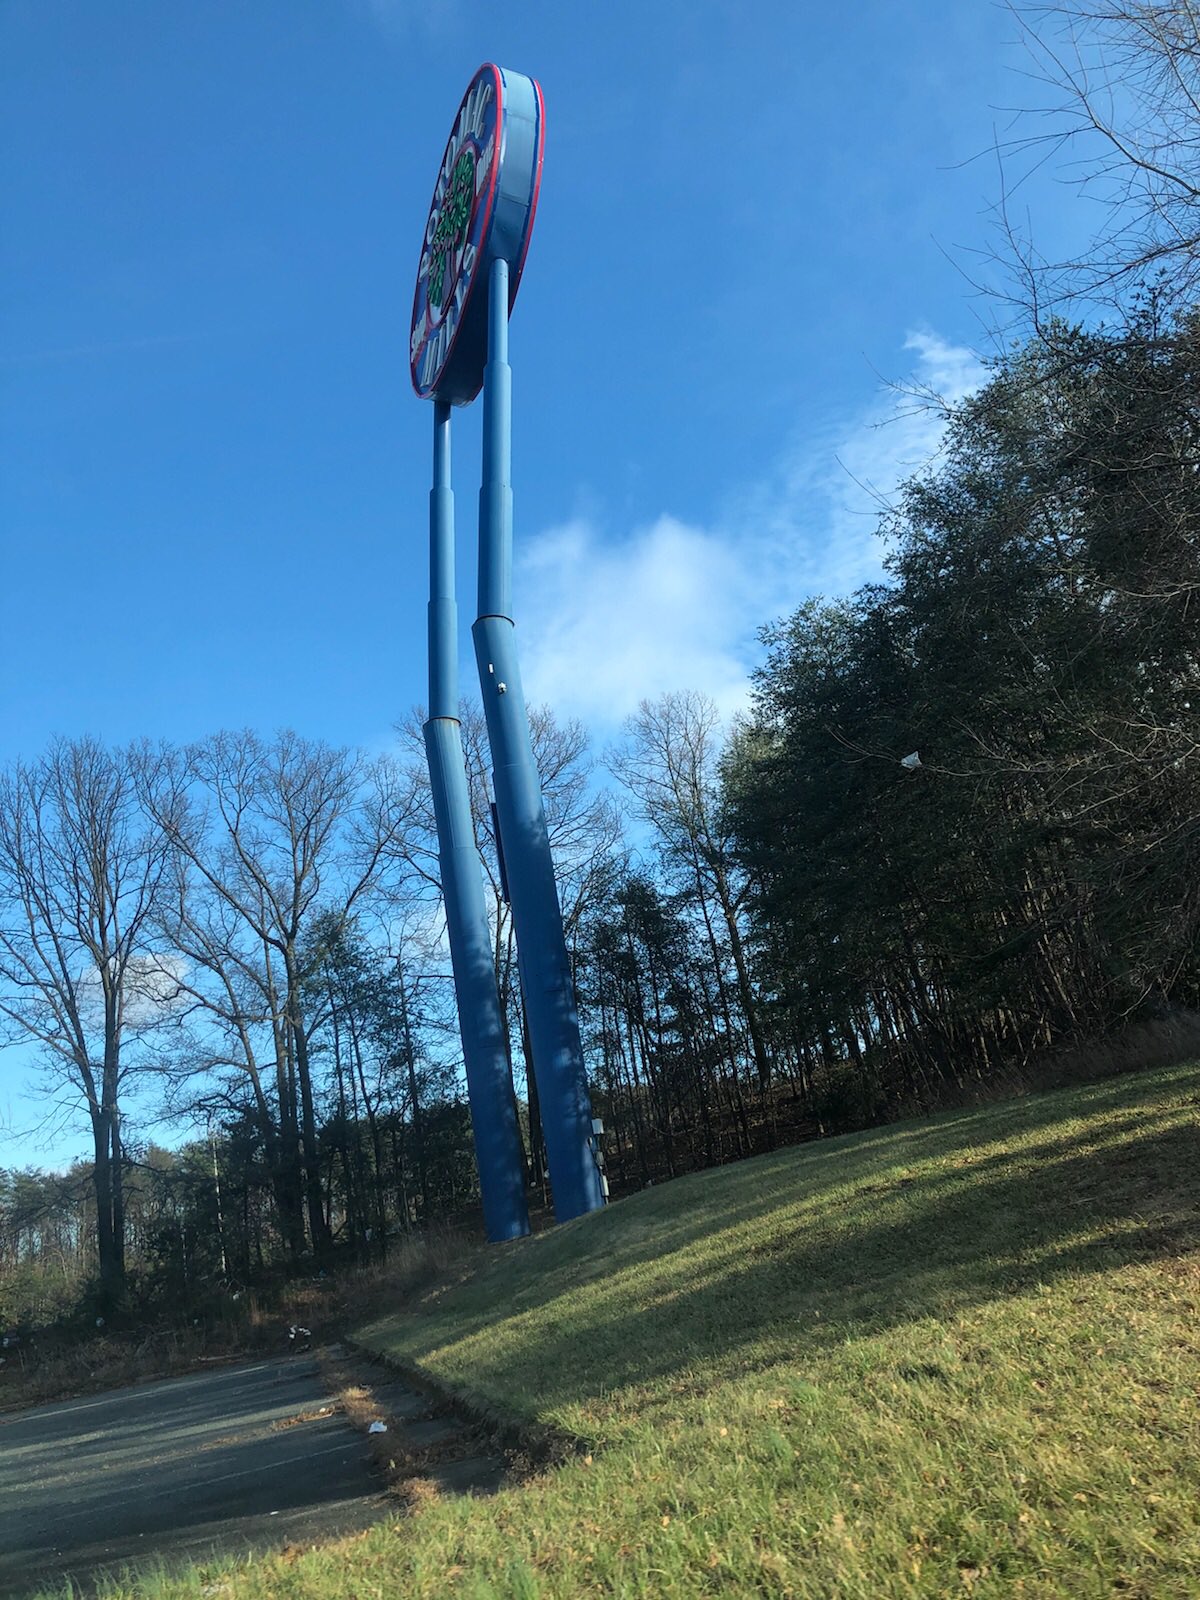 Leaning Potomac Mills sign removed after windstorm 